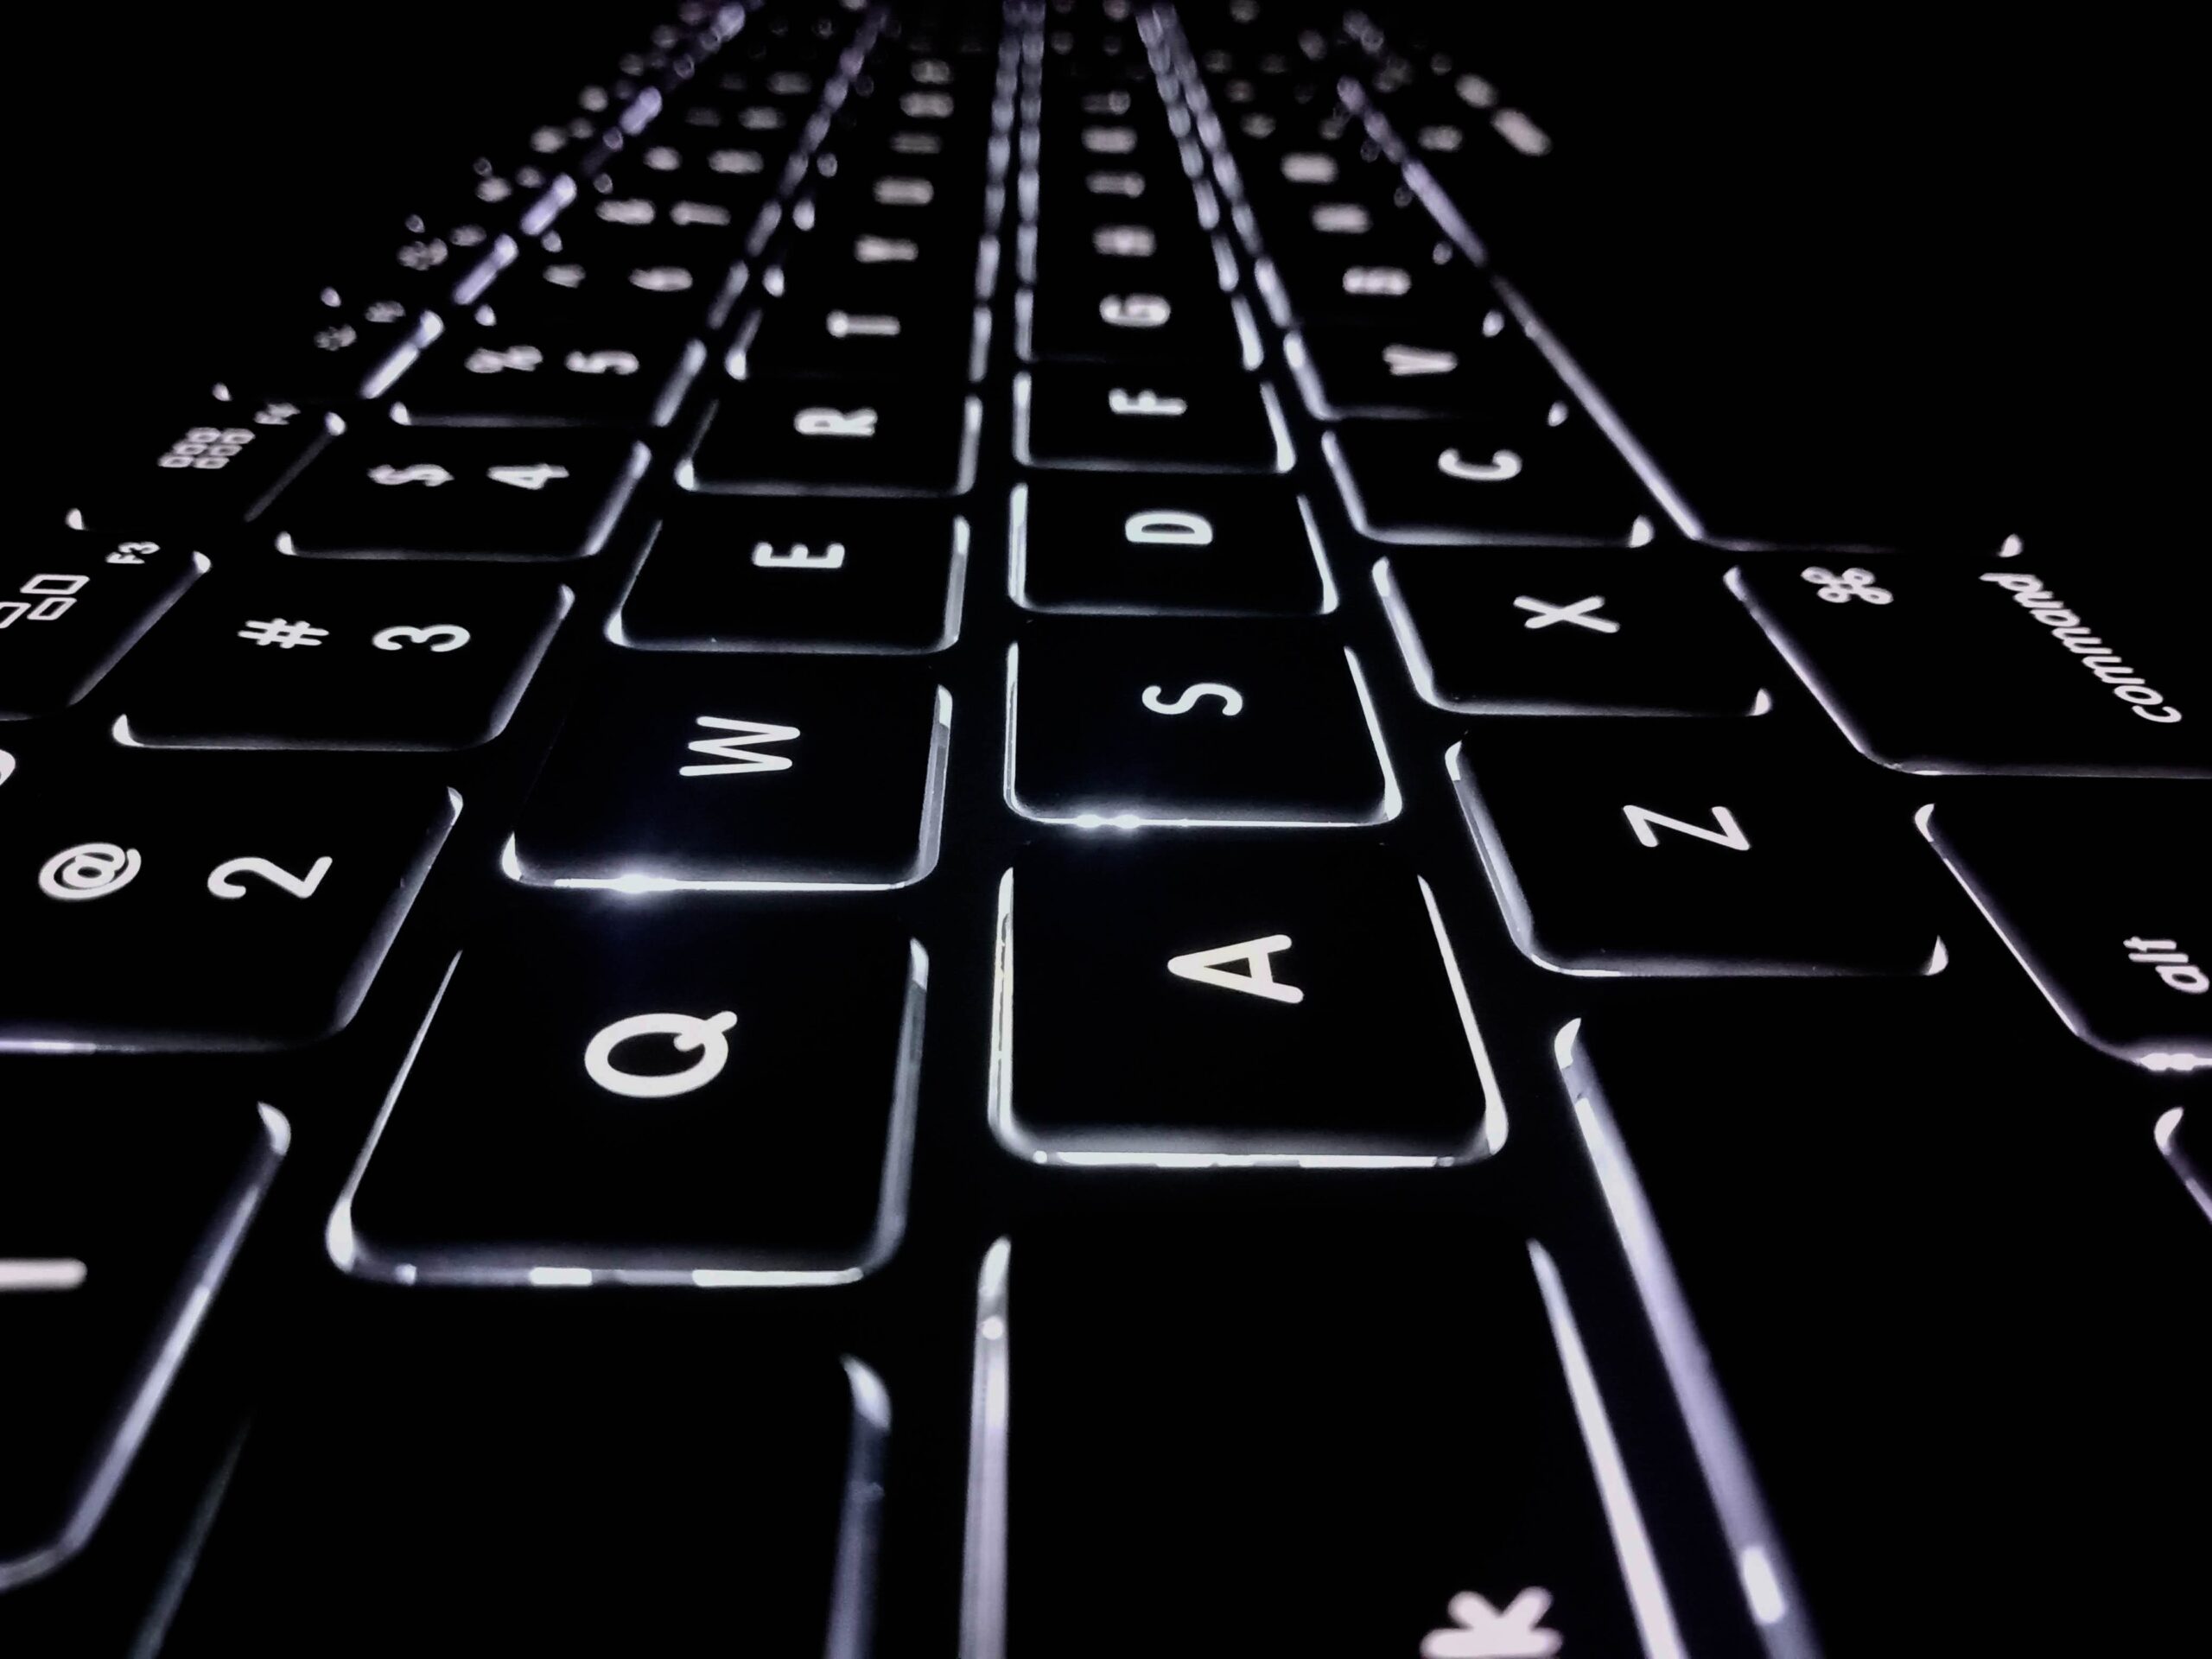 image of keyboard with letters lighten up